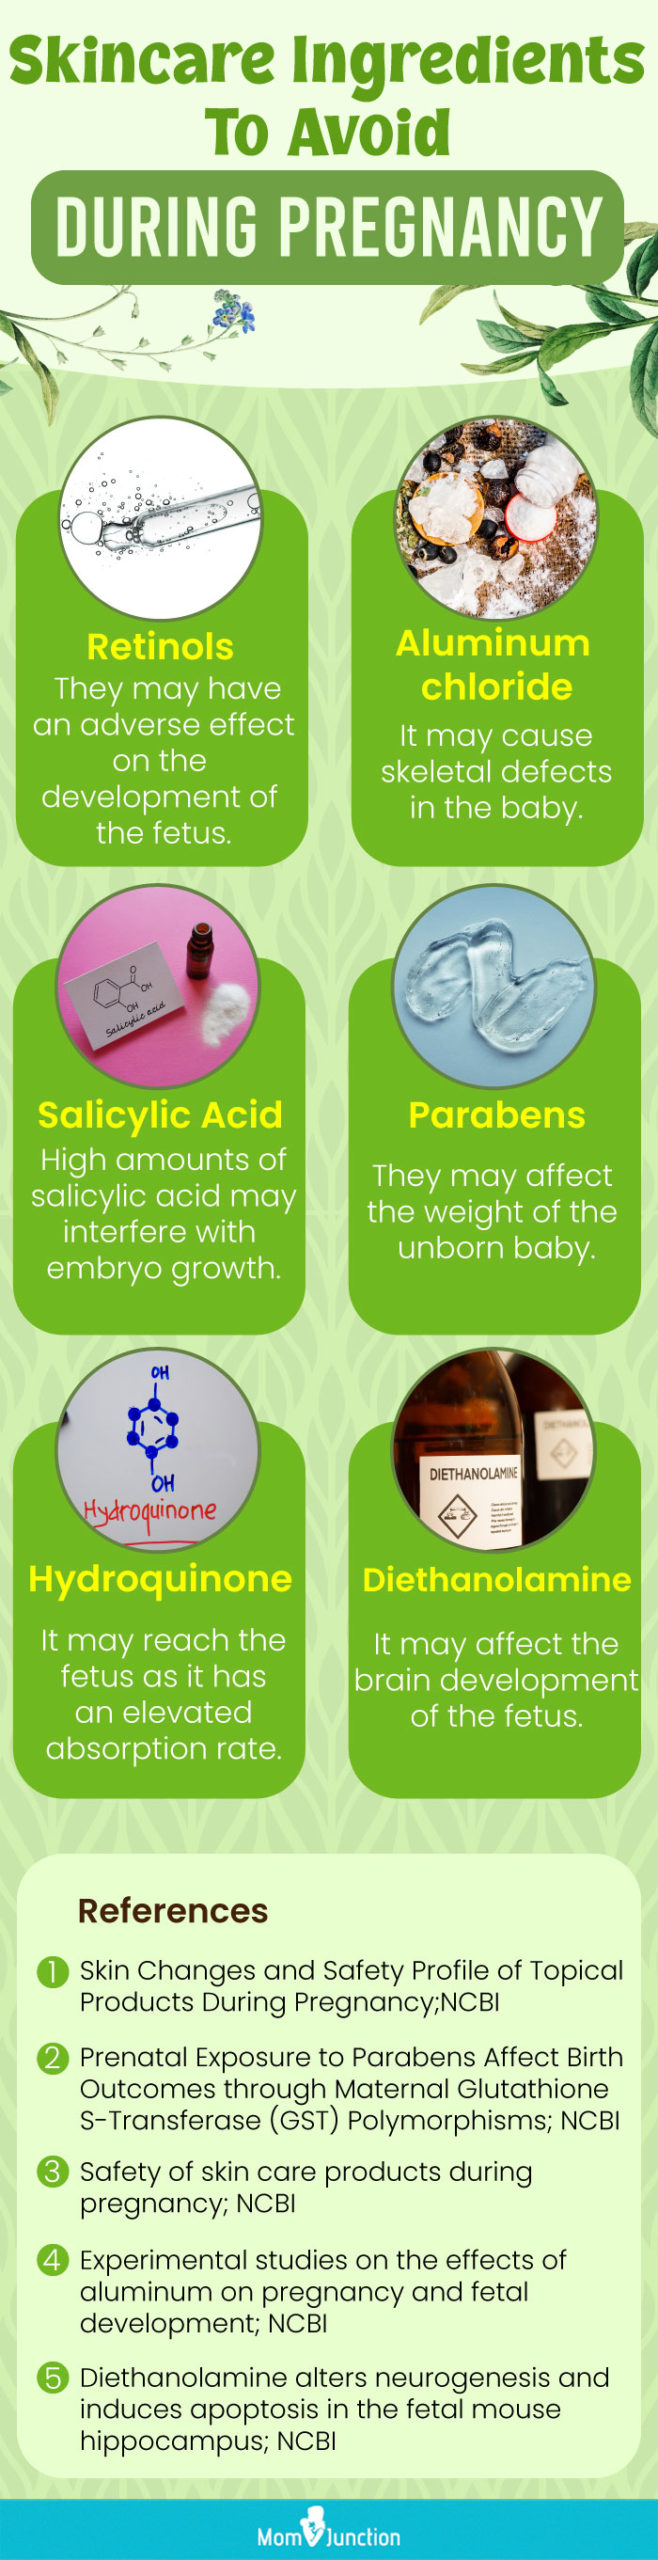 Skincare Ingredients To Avoid During Pregnancy (infographic)